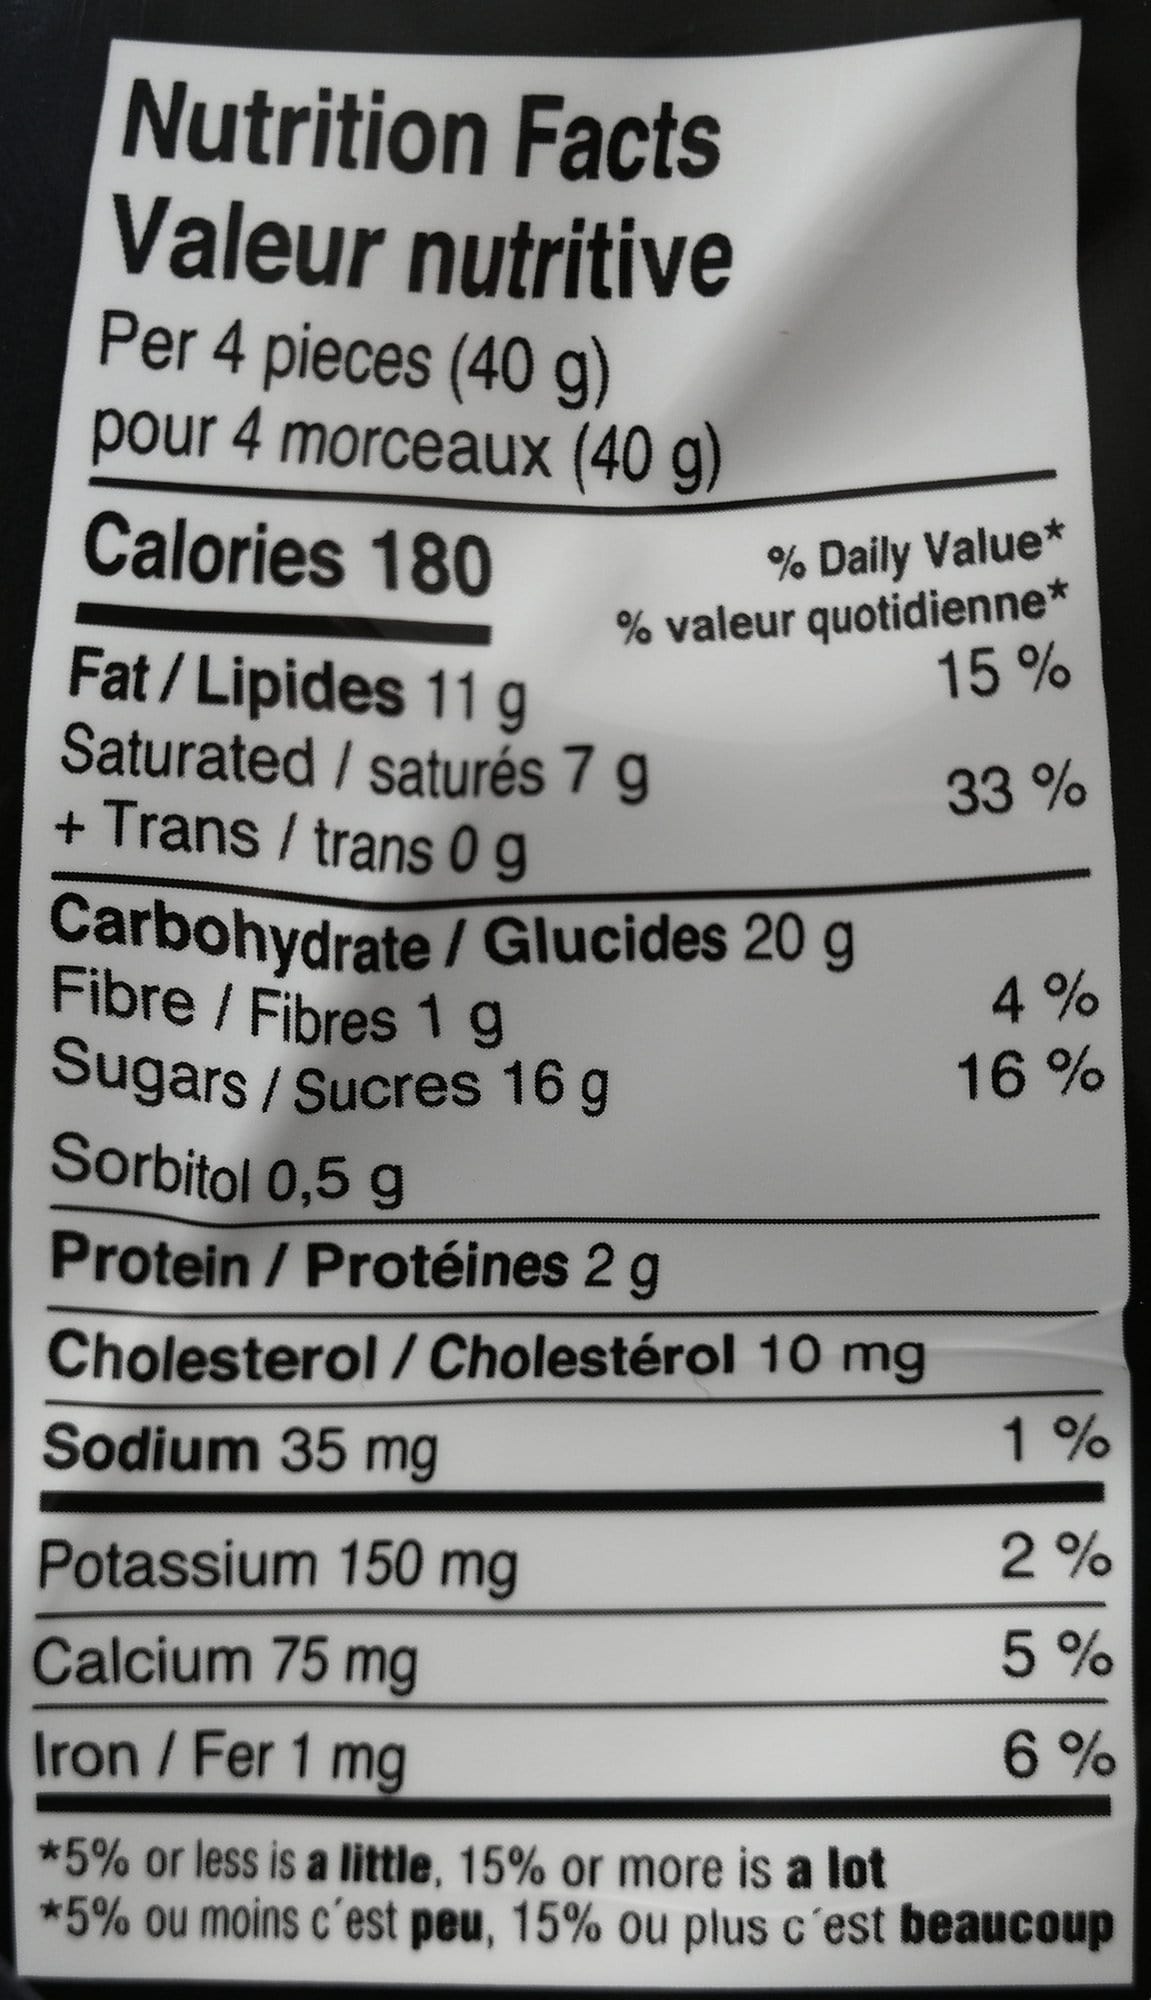 Image of the nutrition facts for the chocolates from the back of the container.